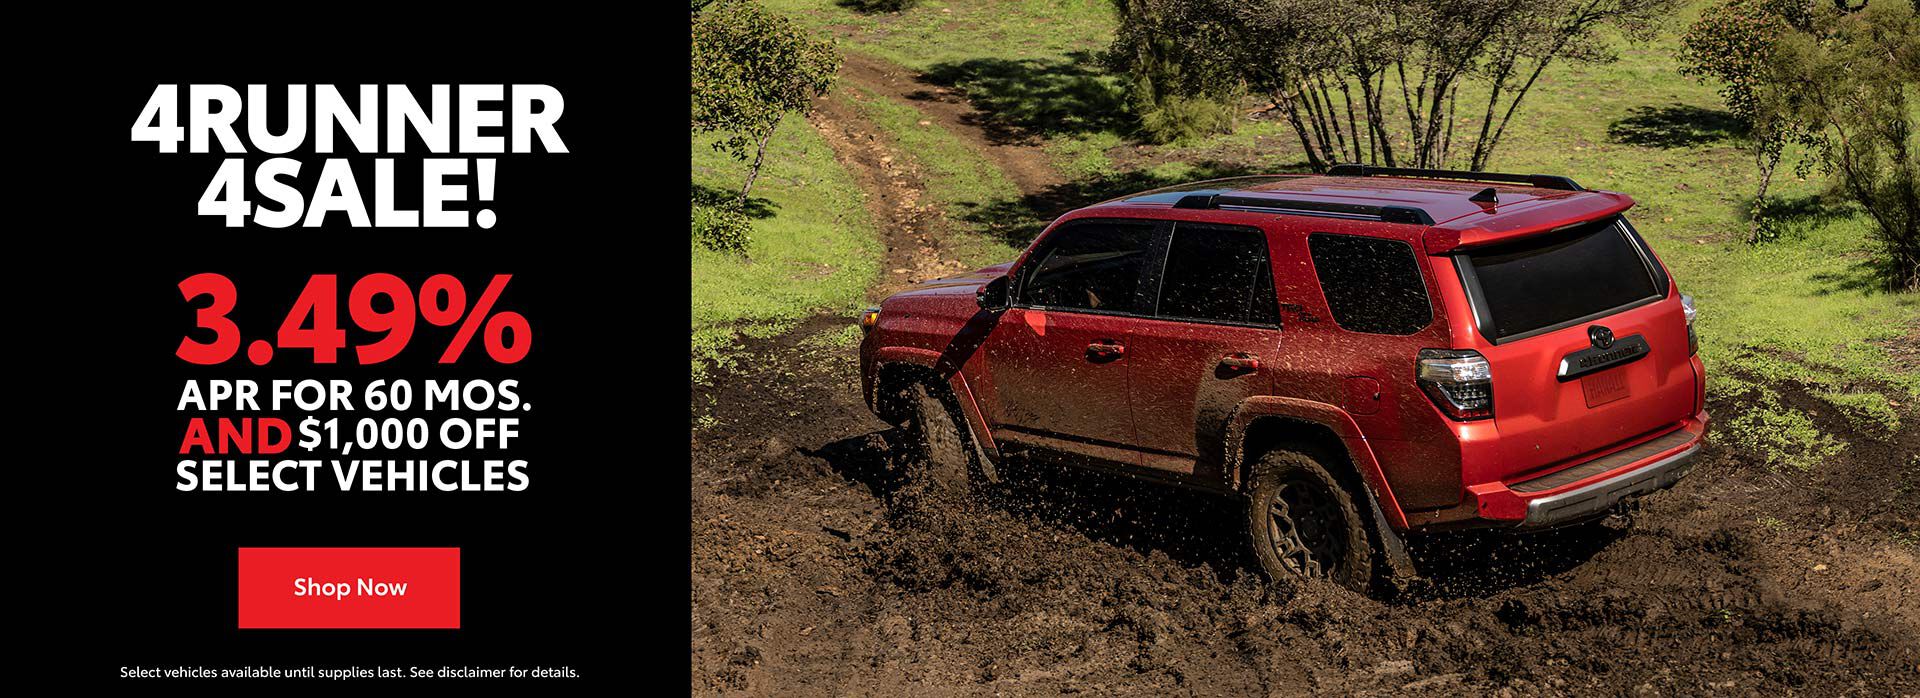 2023 4Runner Sale 3.49% APR for 60 months and $1000 off select vehicles